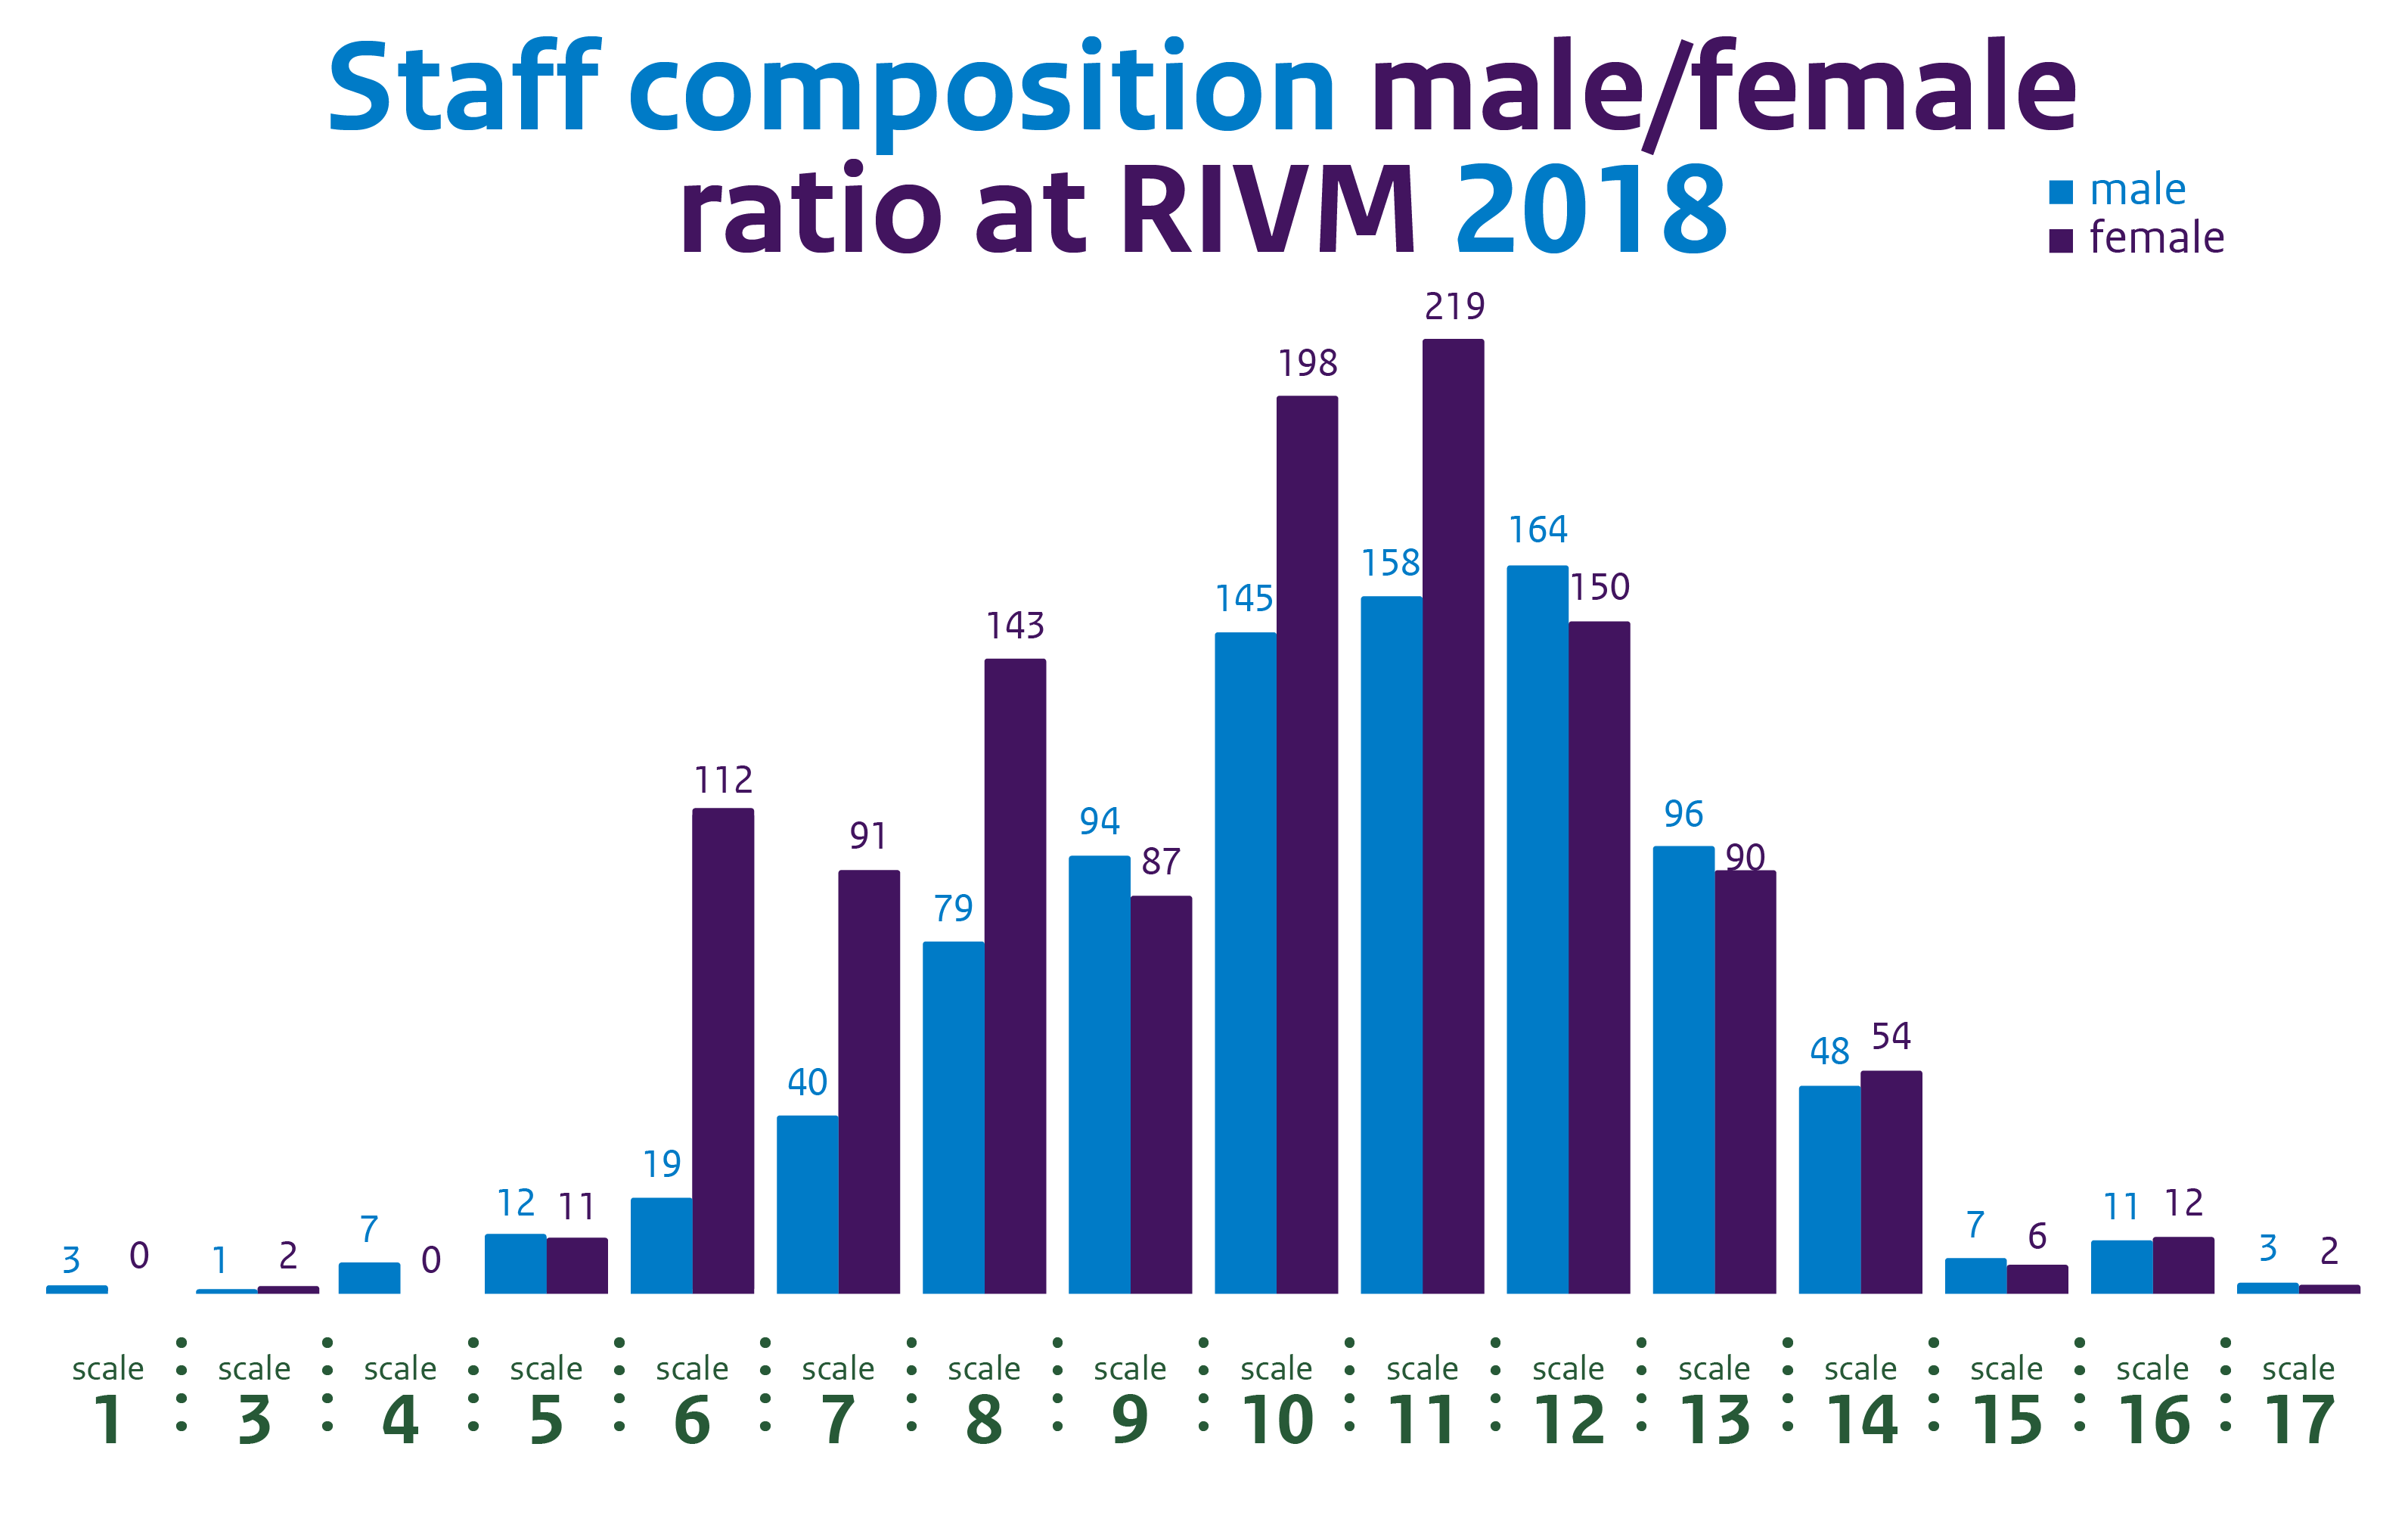 Infographic staff composition male female 2018 